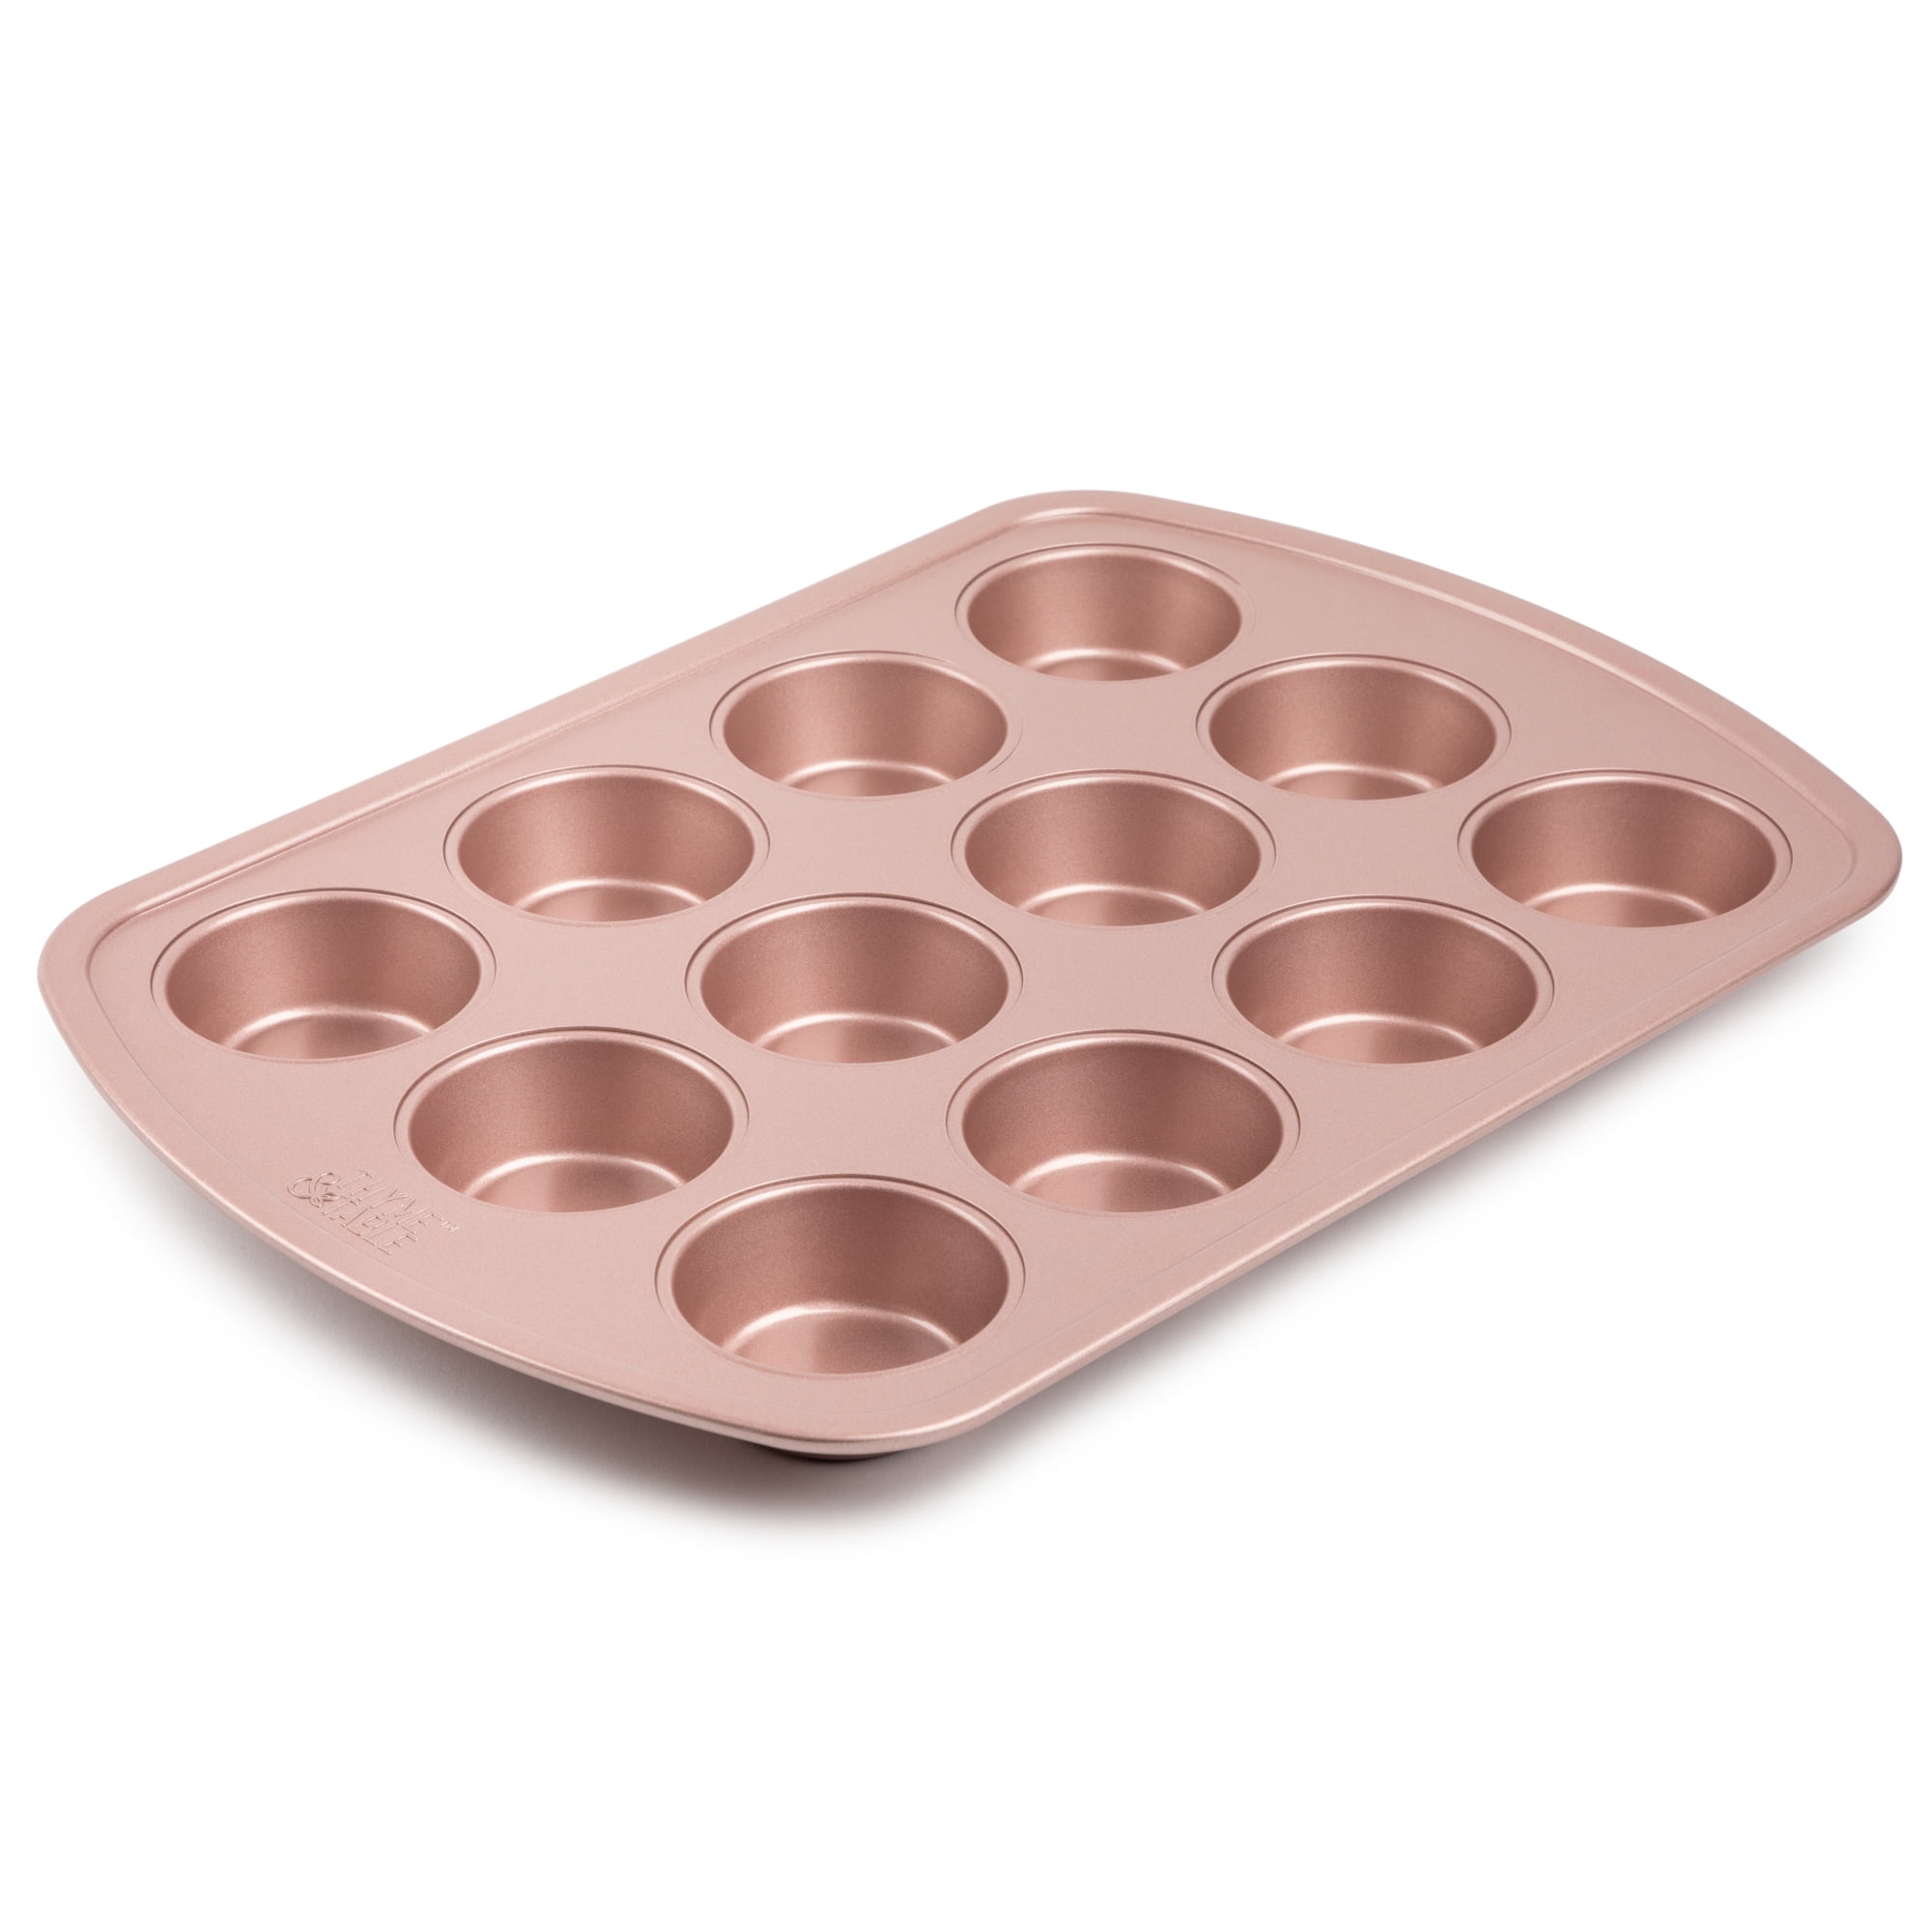 Thyme & Table Non-Stick Muffin Pan, 16 Inch, Rose Gold